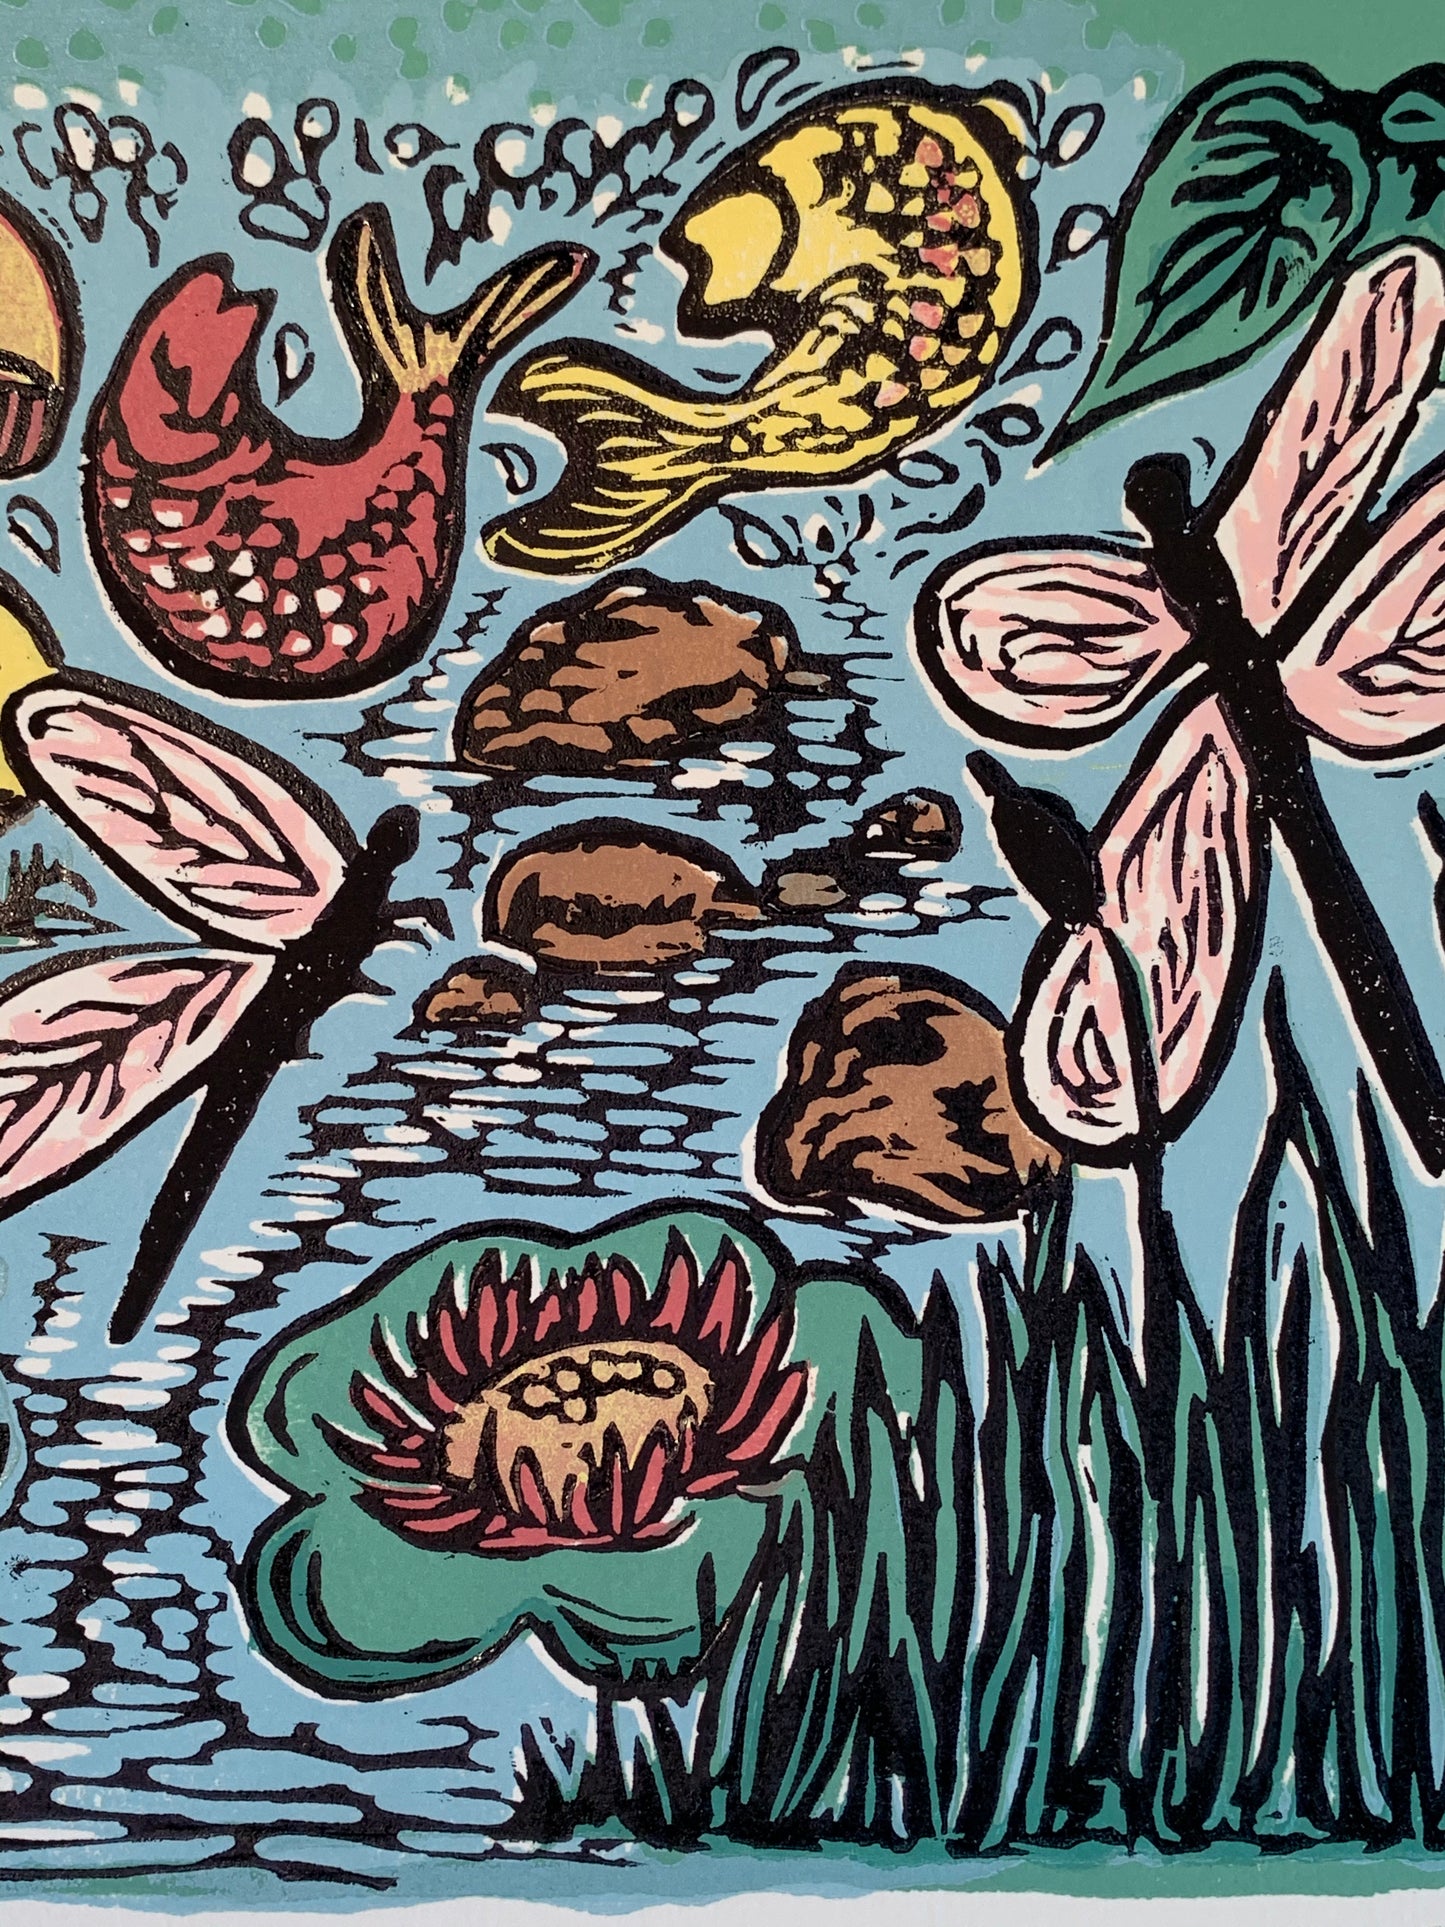 Bright Color Original Woodcut About the Pond Child Art Frog Fish Dragonfly